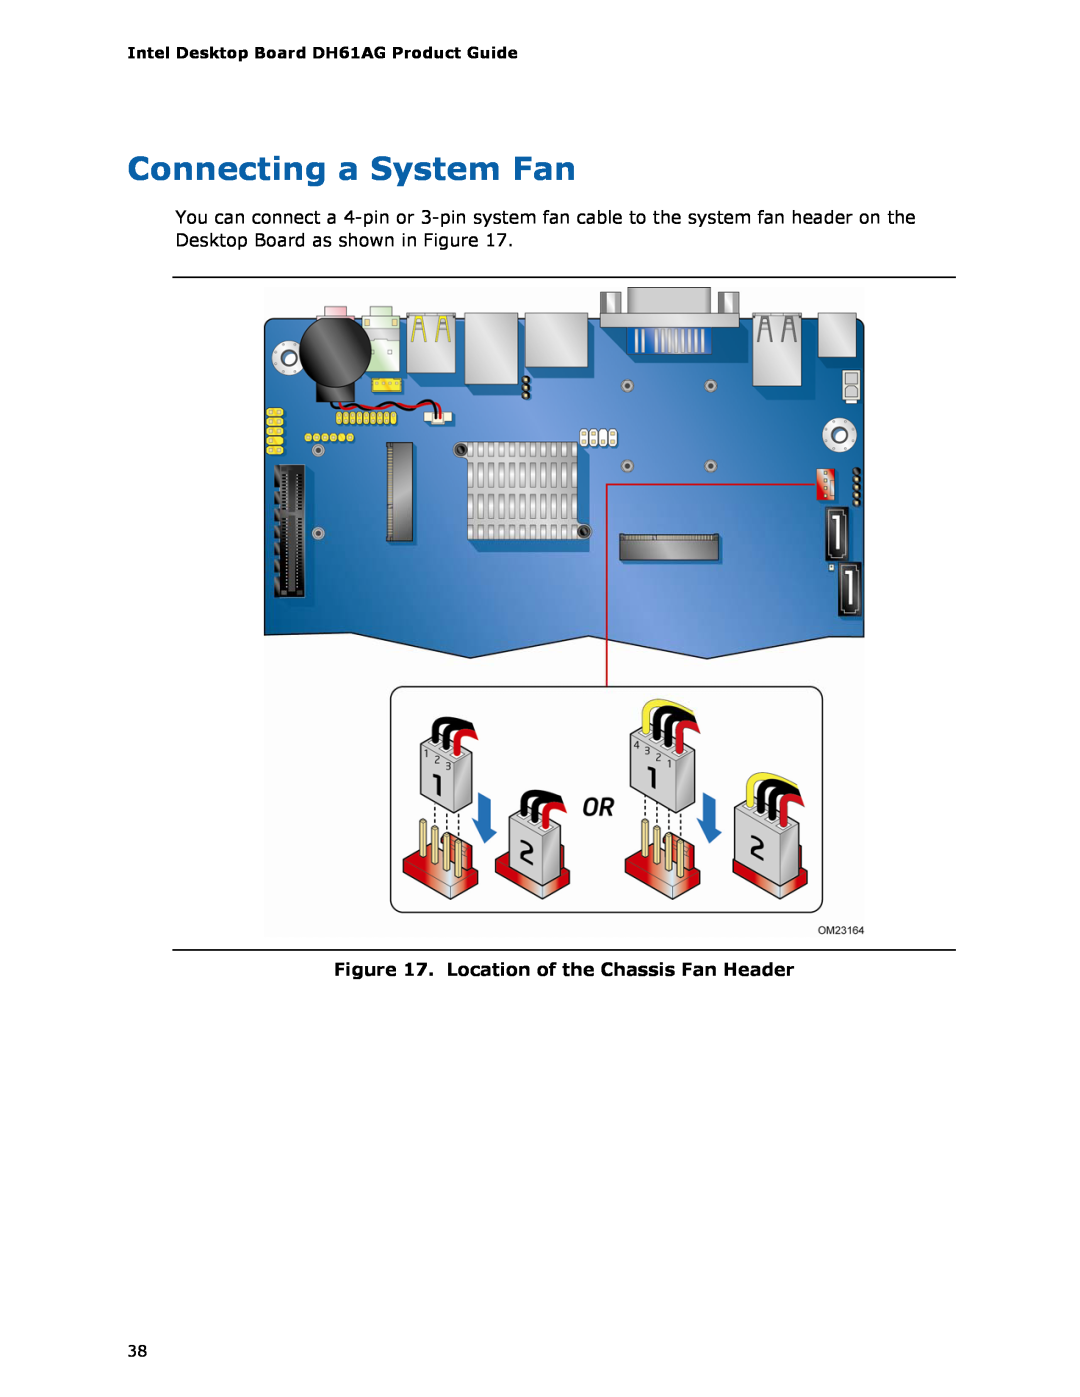 Intel BOXDH61AG manual Connecting a System Fan, Location of the Chassis Fan Header 